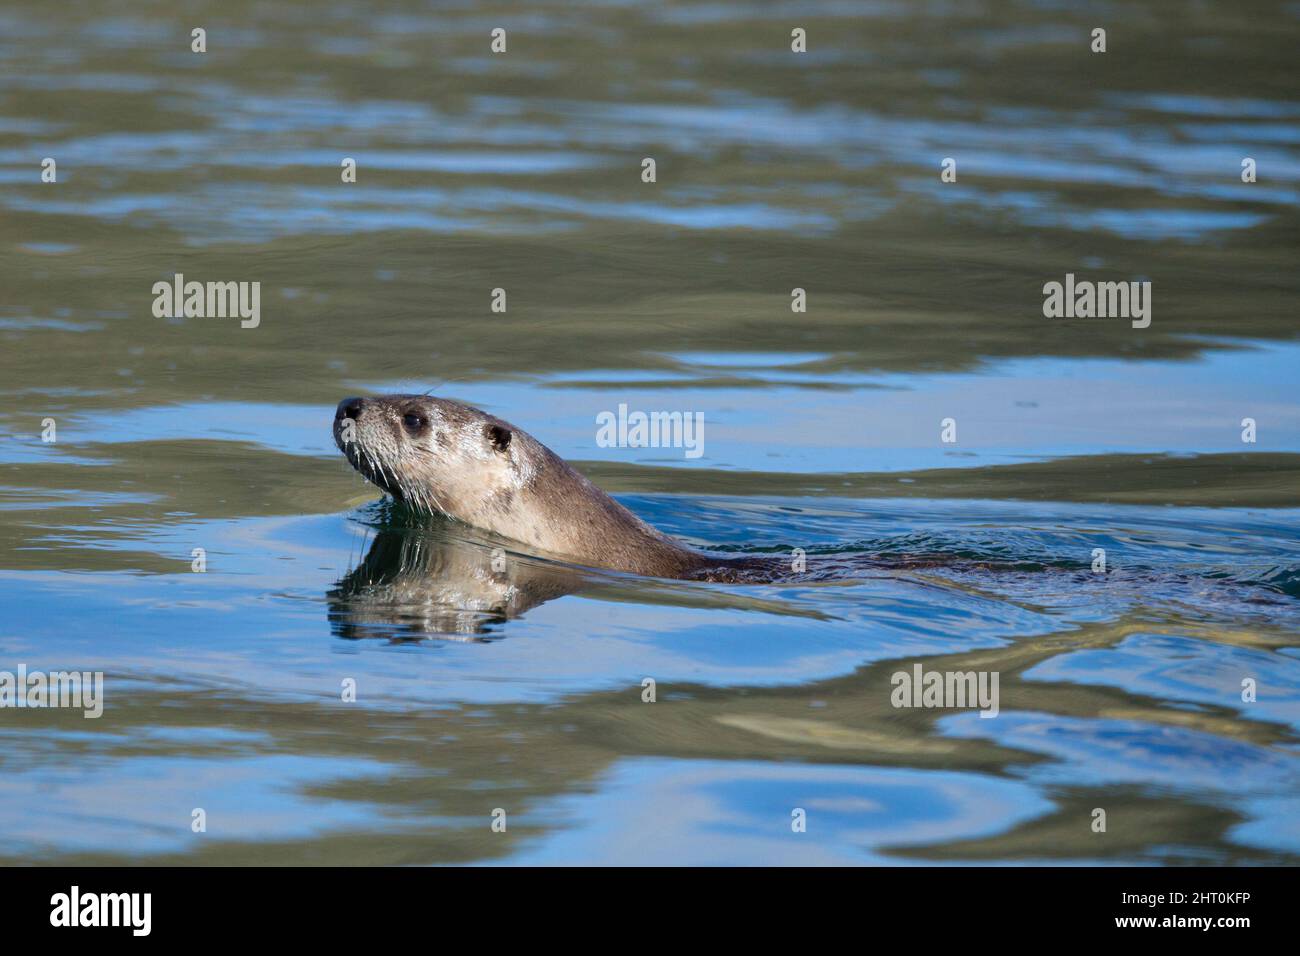 Northern river otter (Lontra canadensis) in the Yellowstone River, Hayden Valley, Calcite Springs Overlook, Yellowstone National Park, Wyoming, United Stock Photo